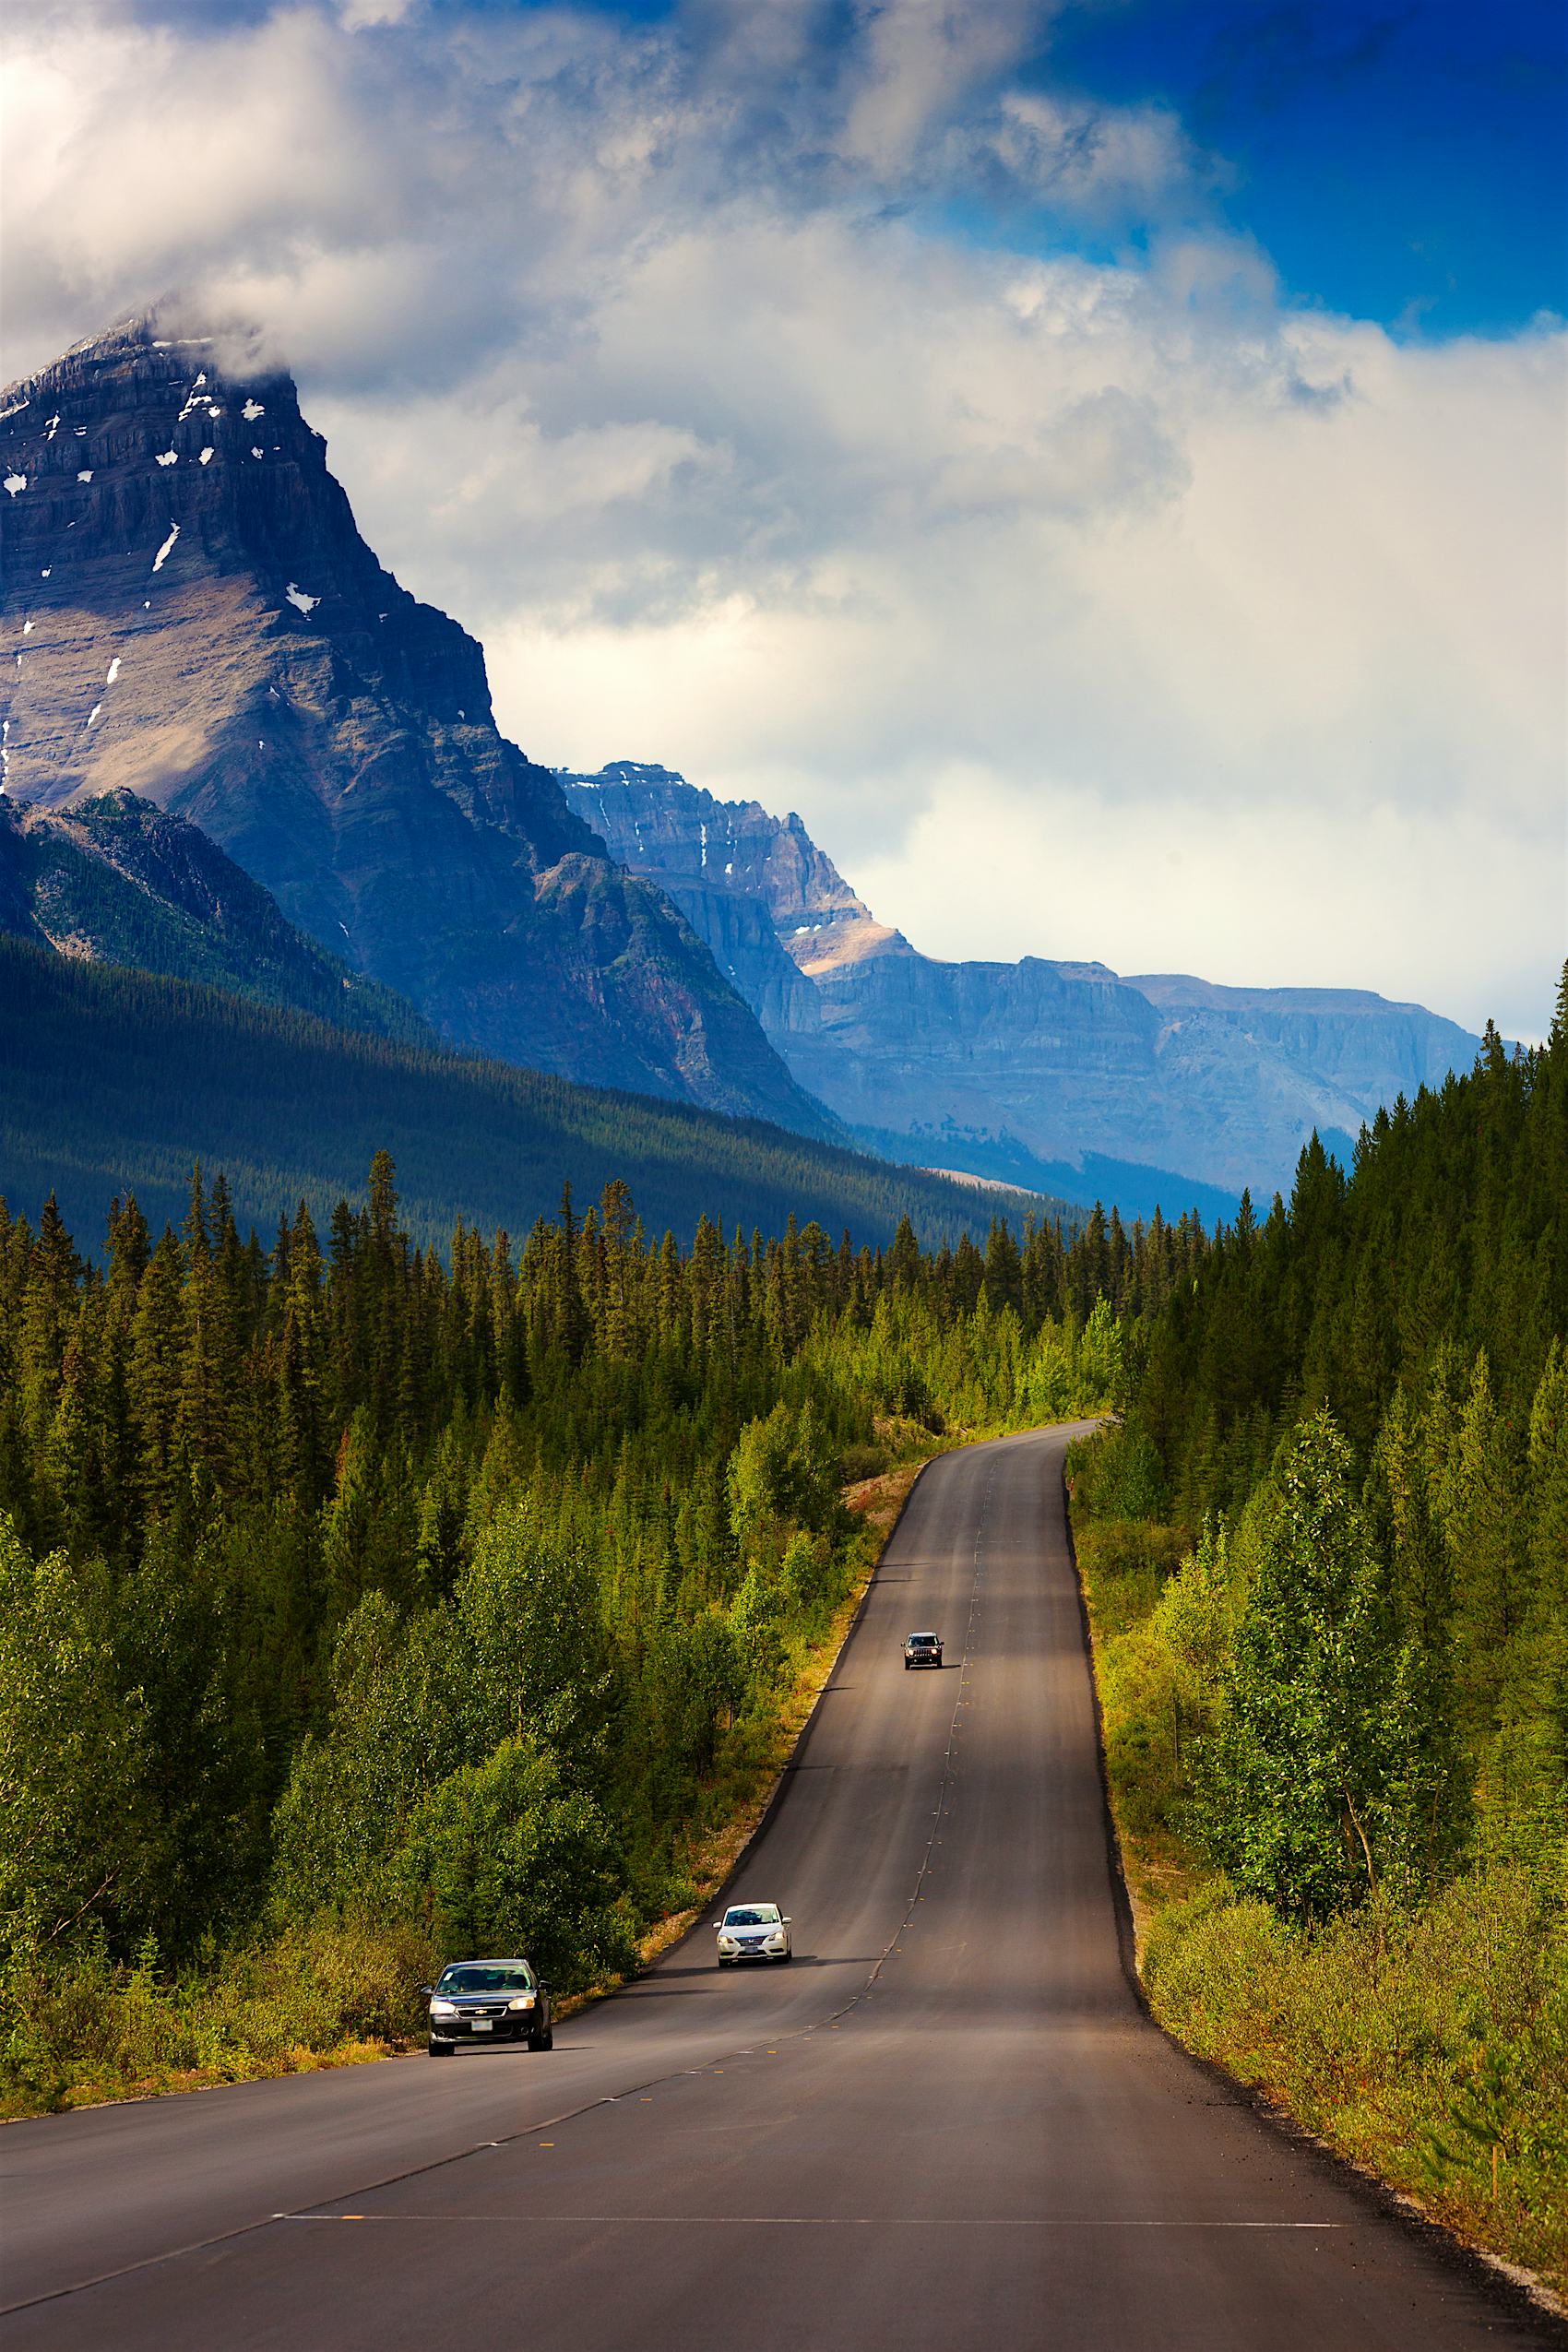 best road trips canada lonely planet